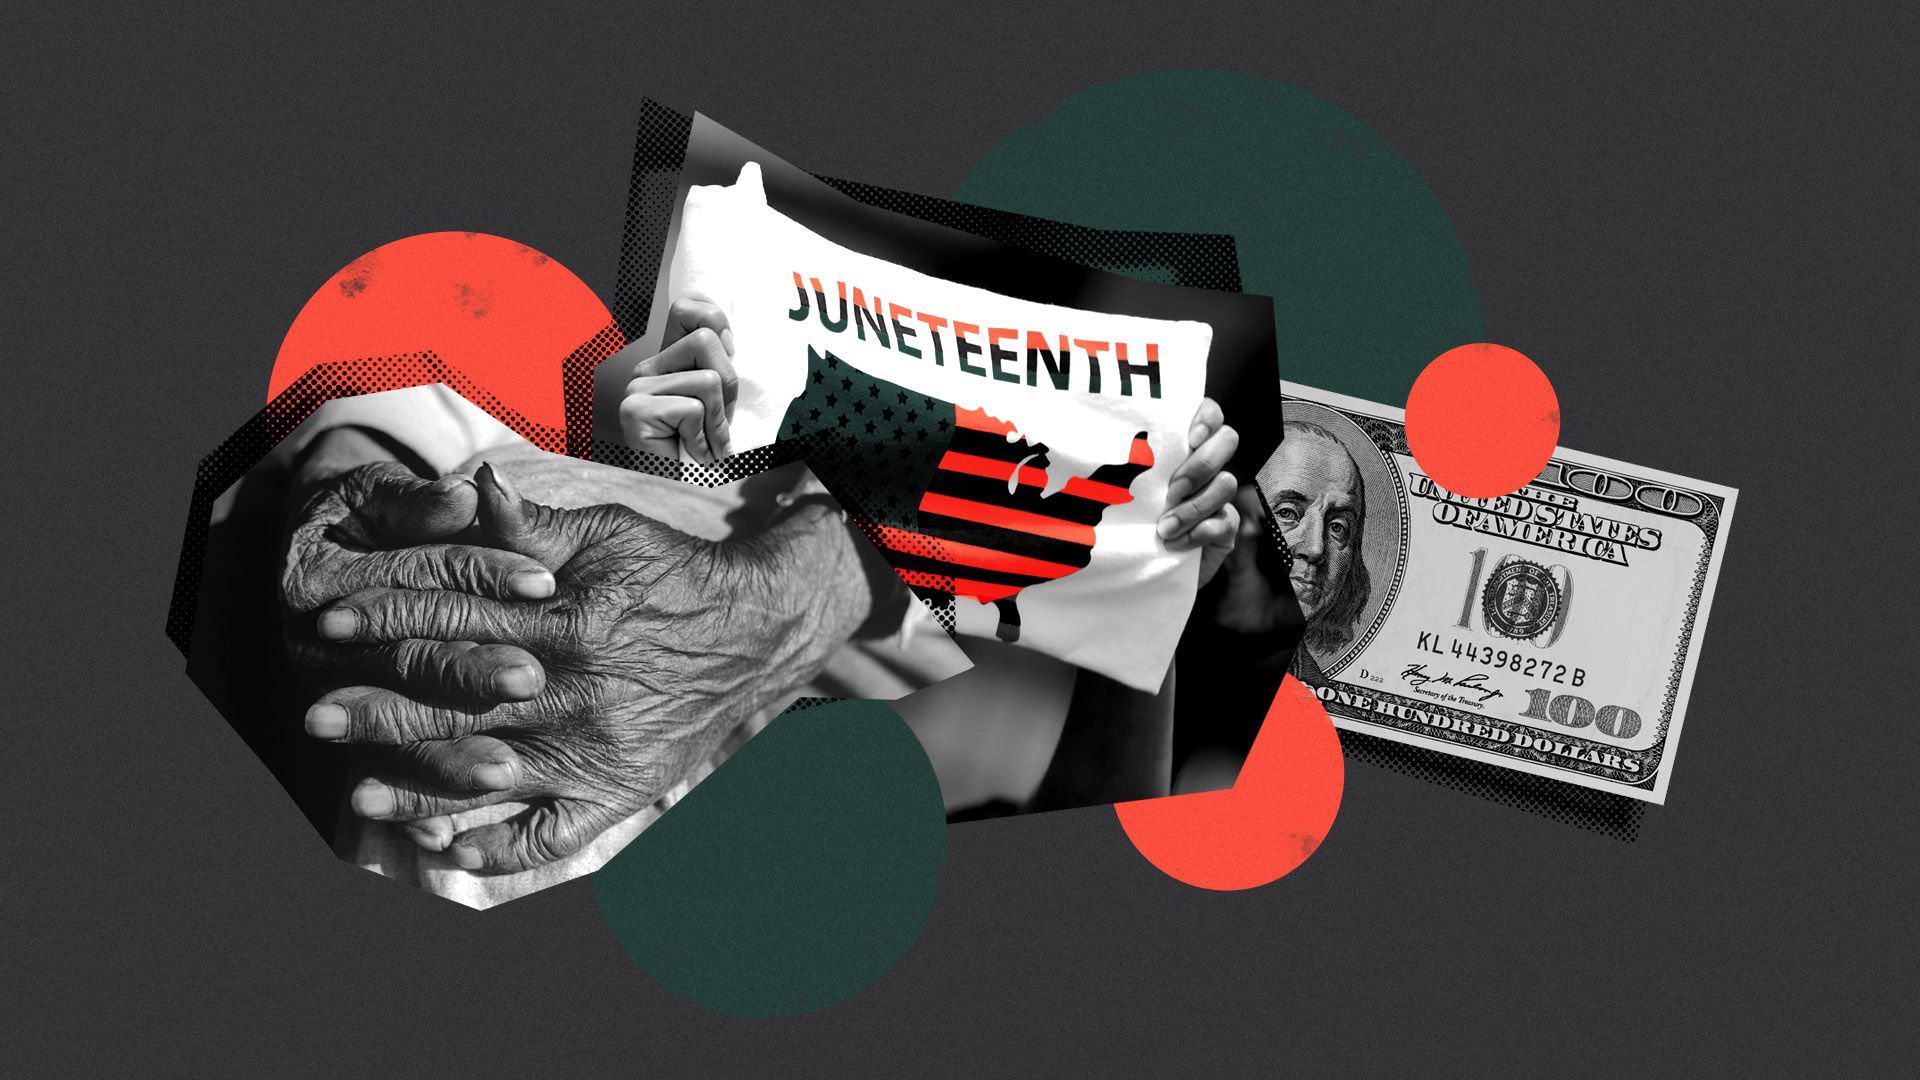 Photo illustration of a person holding up a banner that reads "Juneteenth," a pair of folded hands, and a hundred dollar bill